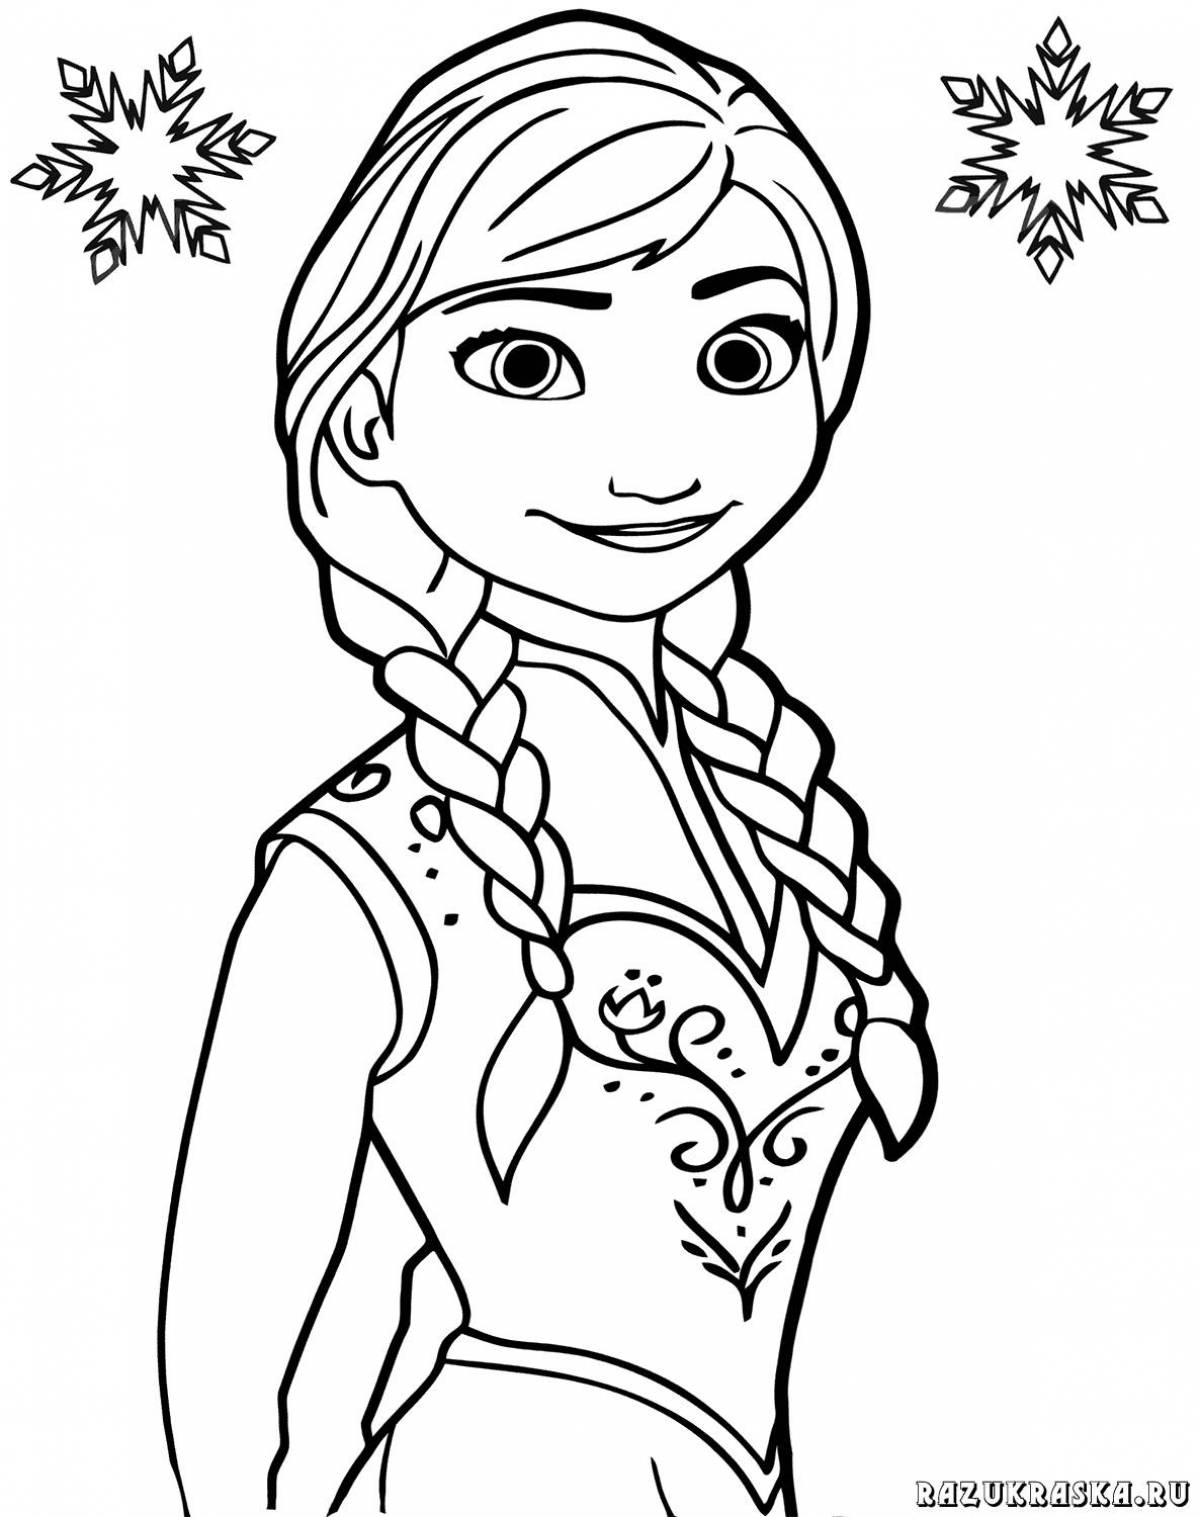 Magic cold heart coloring page for kids